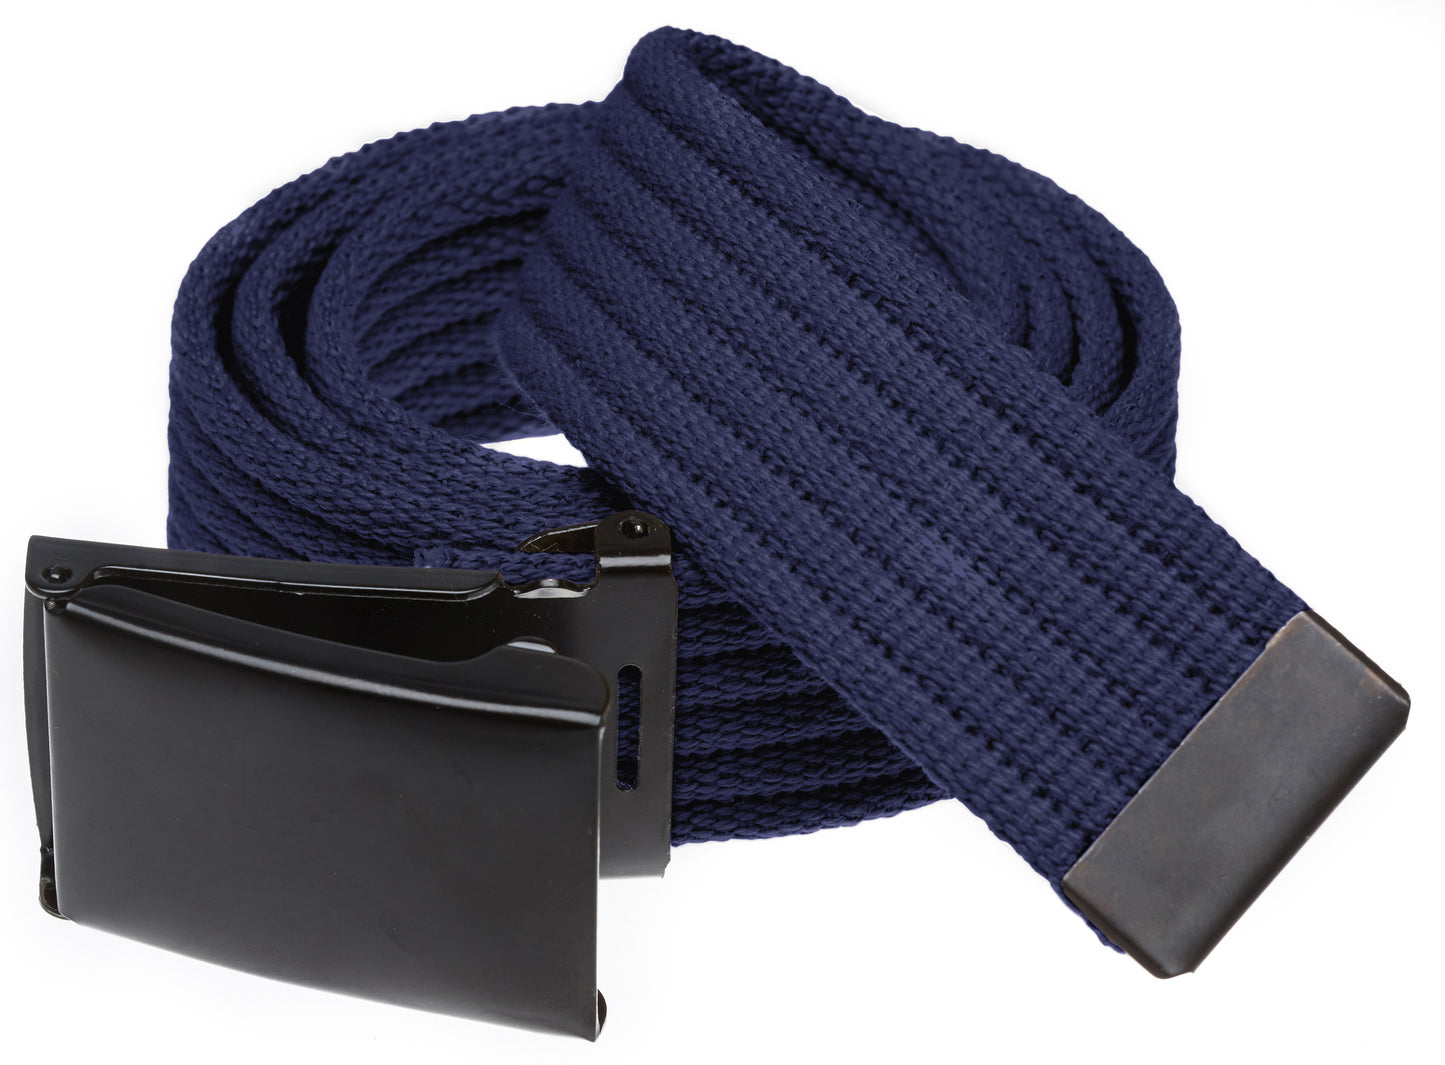 Ribbed Web Belt with Black Flip Top  Buckle- 5 Colors!